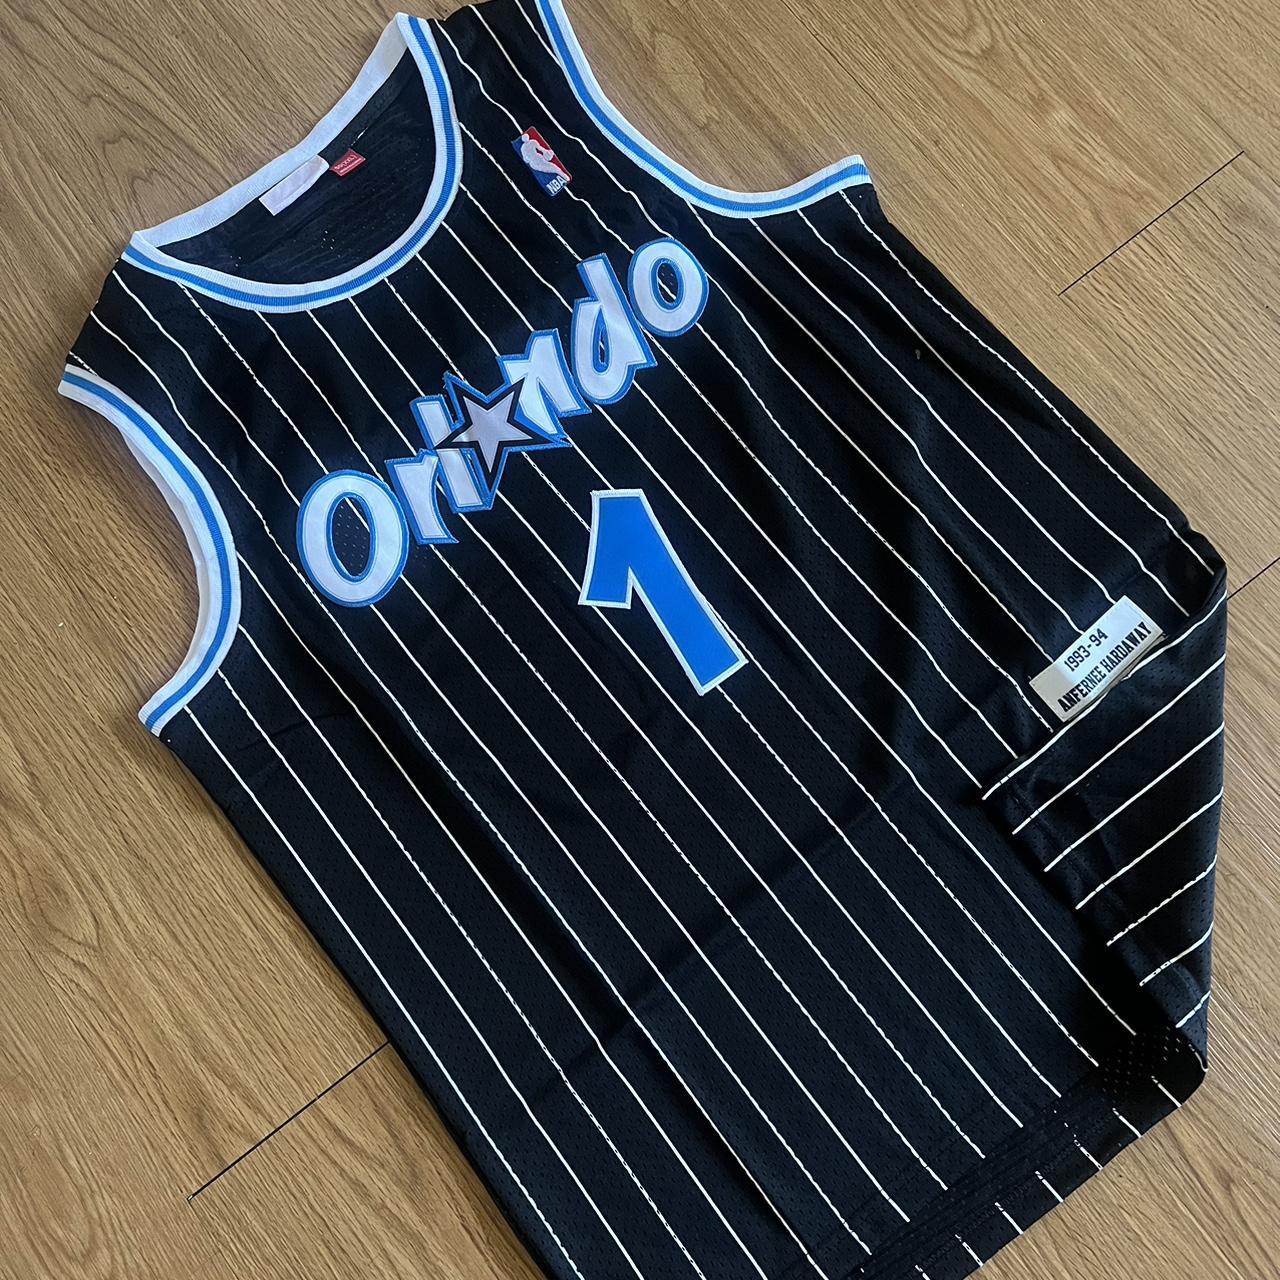 Anfernee Penny Hardaway  Jersey outfit, Mens outfits, Outfits